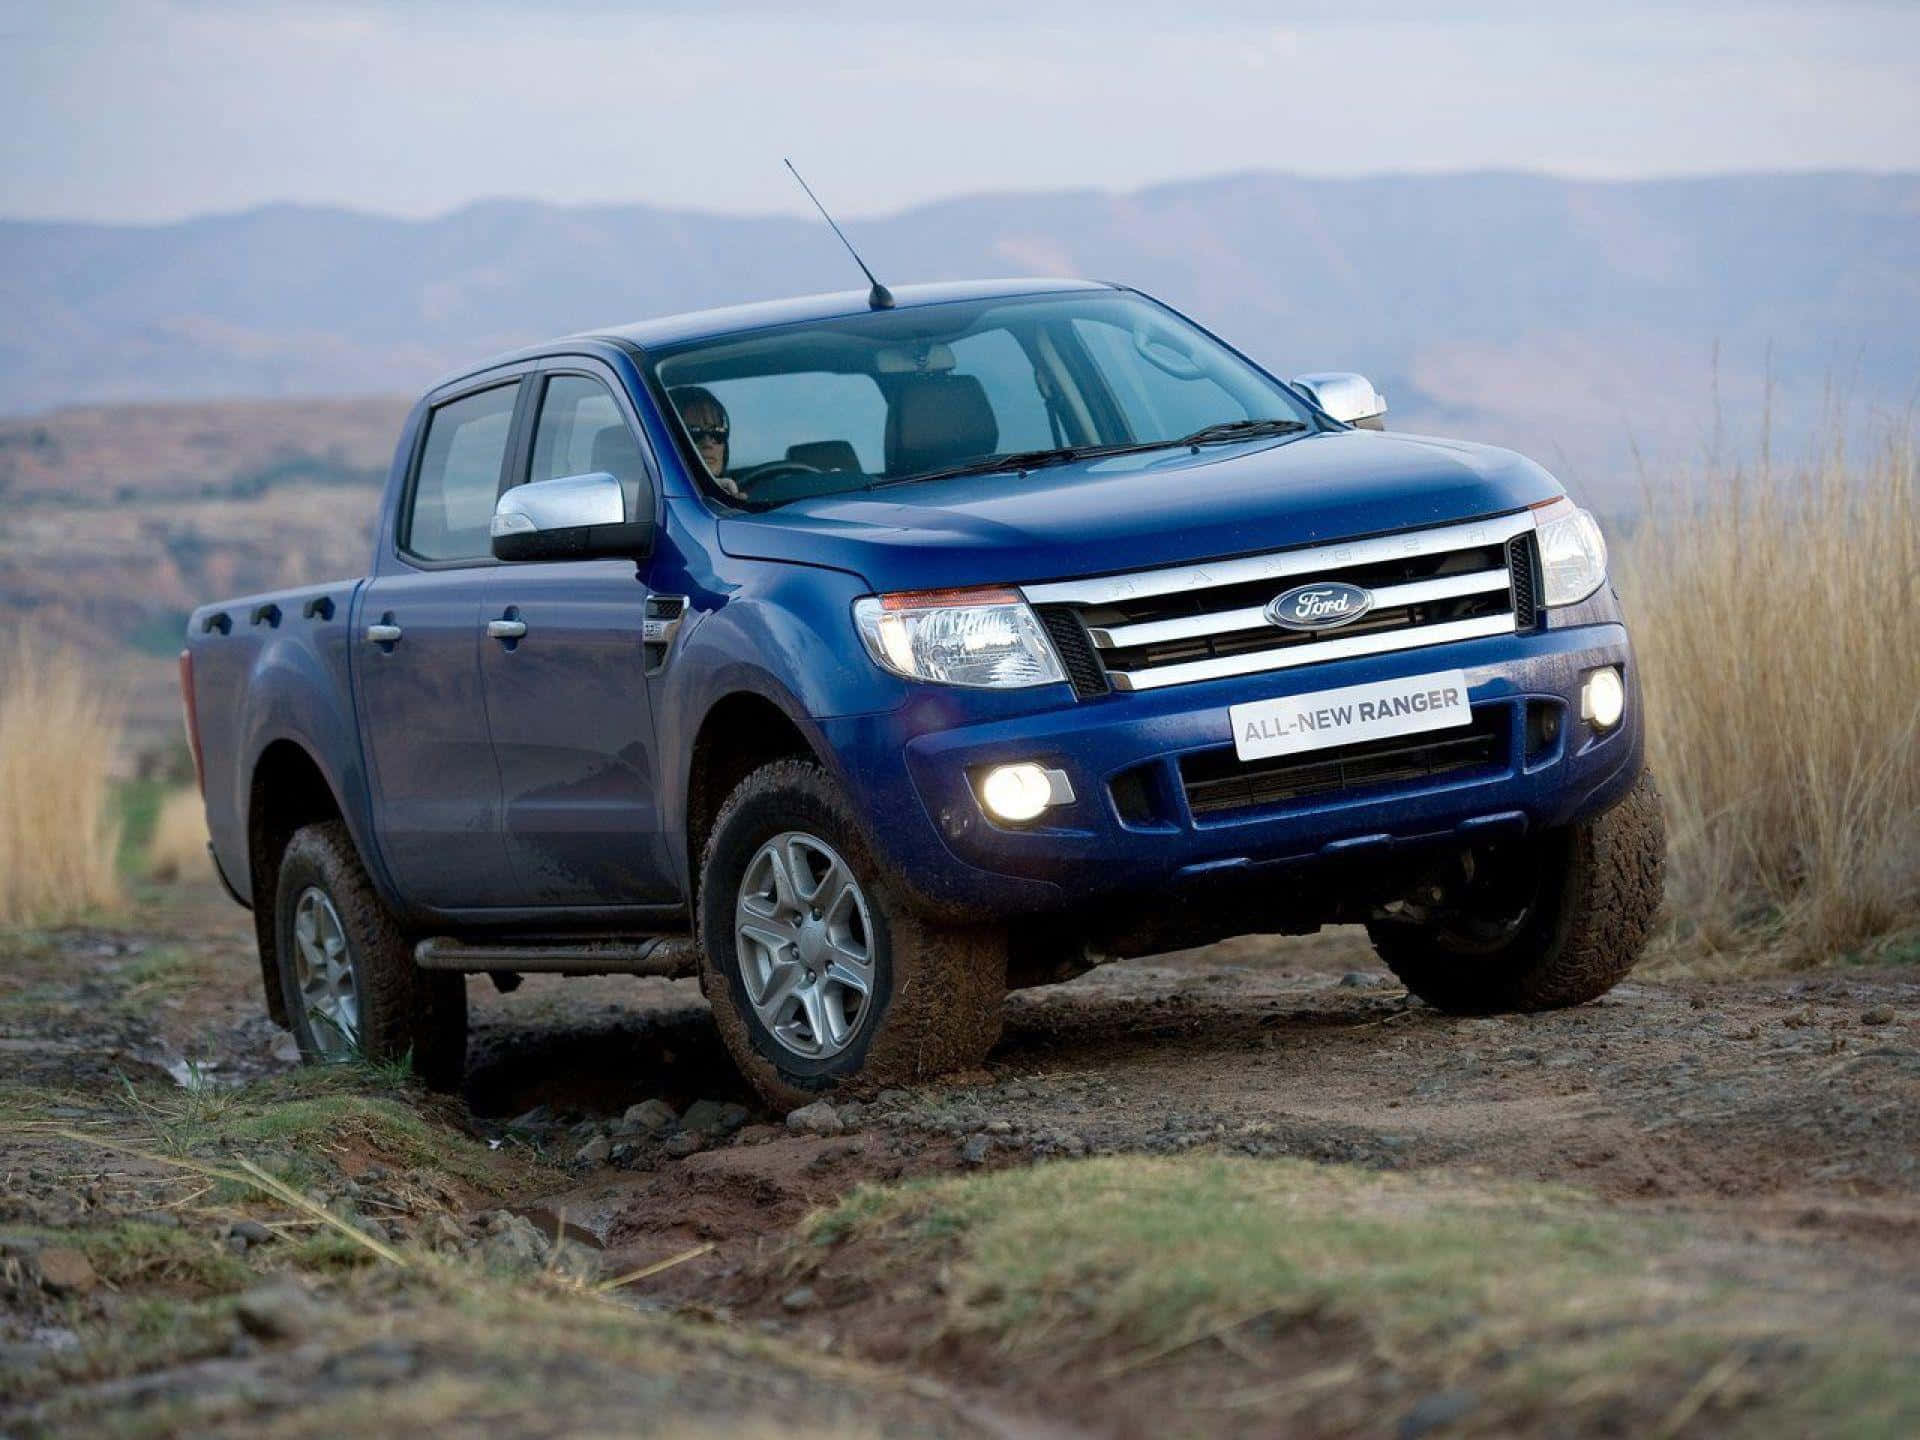 A powerful Ford Ranger in action on a rugged off-road trail Wallpaper